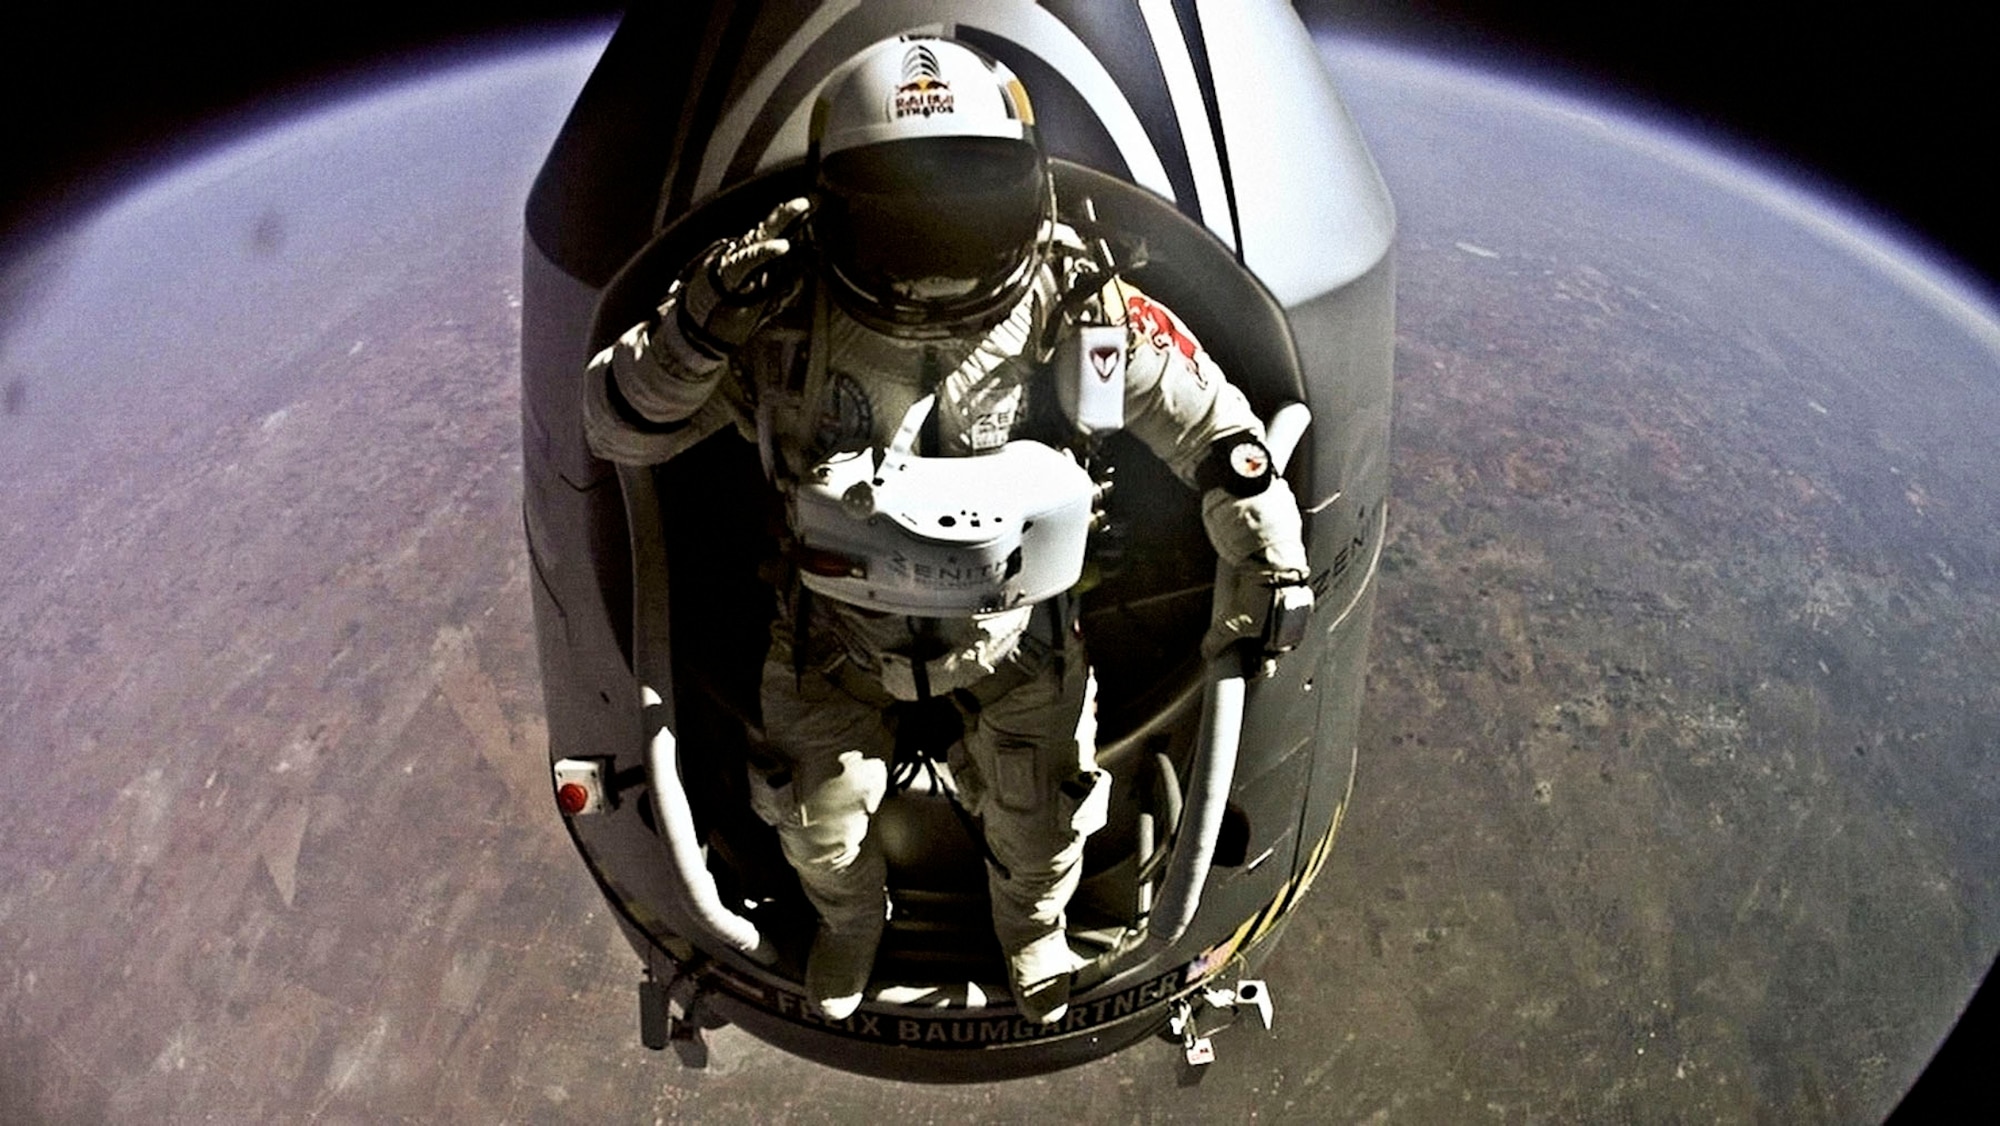 Pilot Felix Baumgartner of Austria jumps out from the capsule during the final manned flight for Red Bull Stratos in Roswell, N.M., on Oct. 14, 2012. The Red Bull Stratos exhibit will be on display at the National Museum of the U.S. Air Force from Jan. 24-March 16, 2014. (Photo courtesy of Red Bull Stratos)